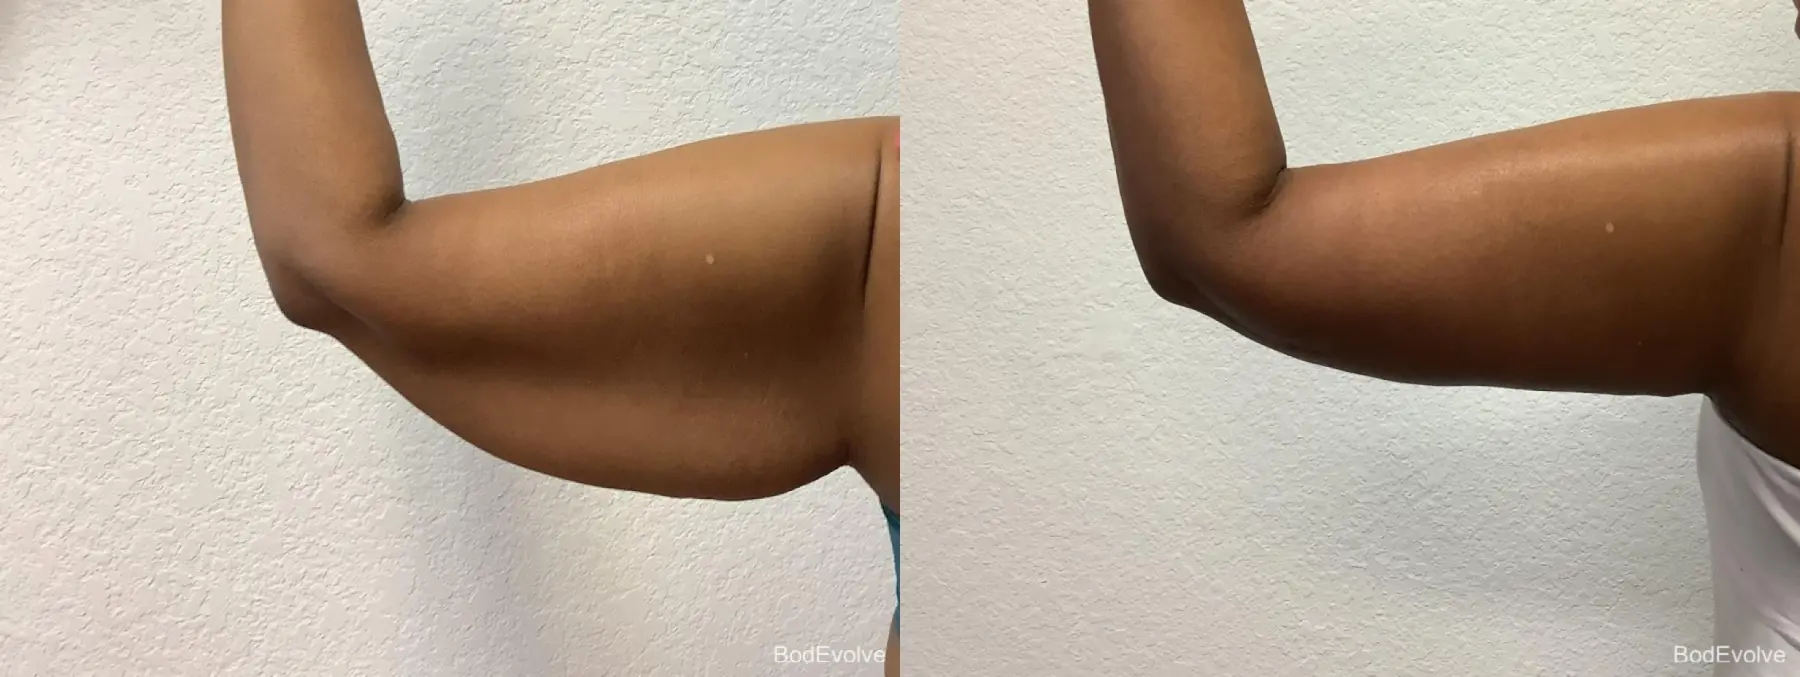 Arm Lift: Patient 2 - Before and After 6